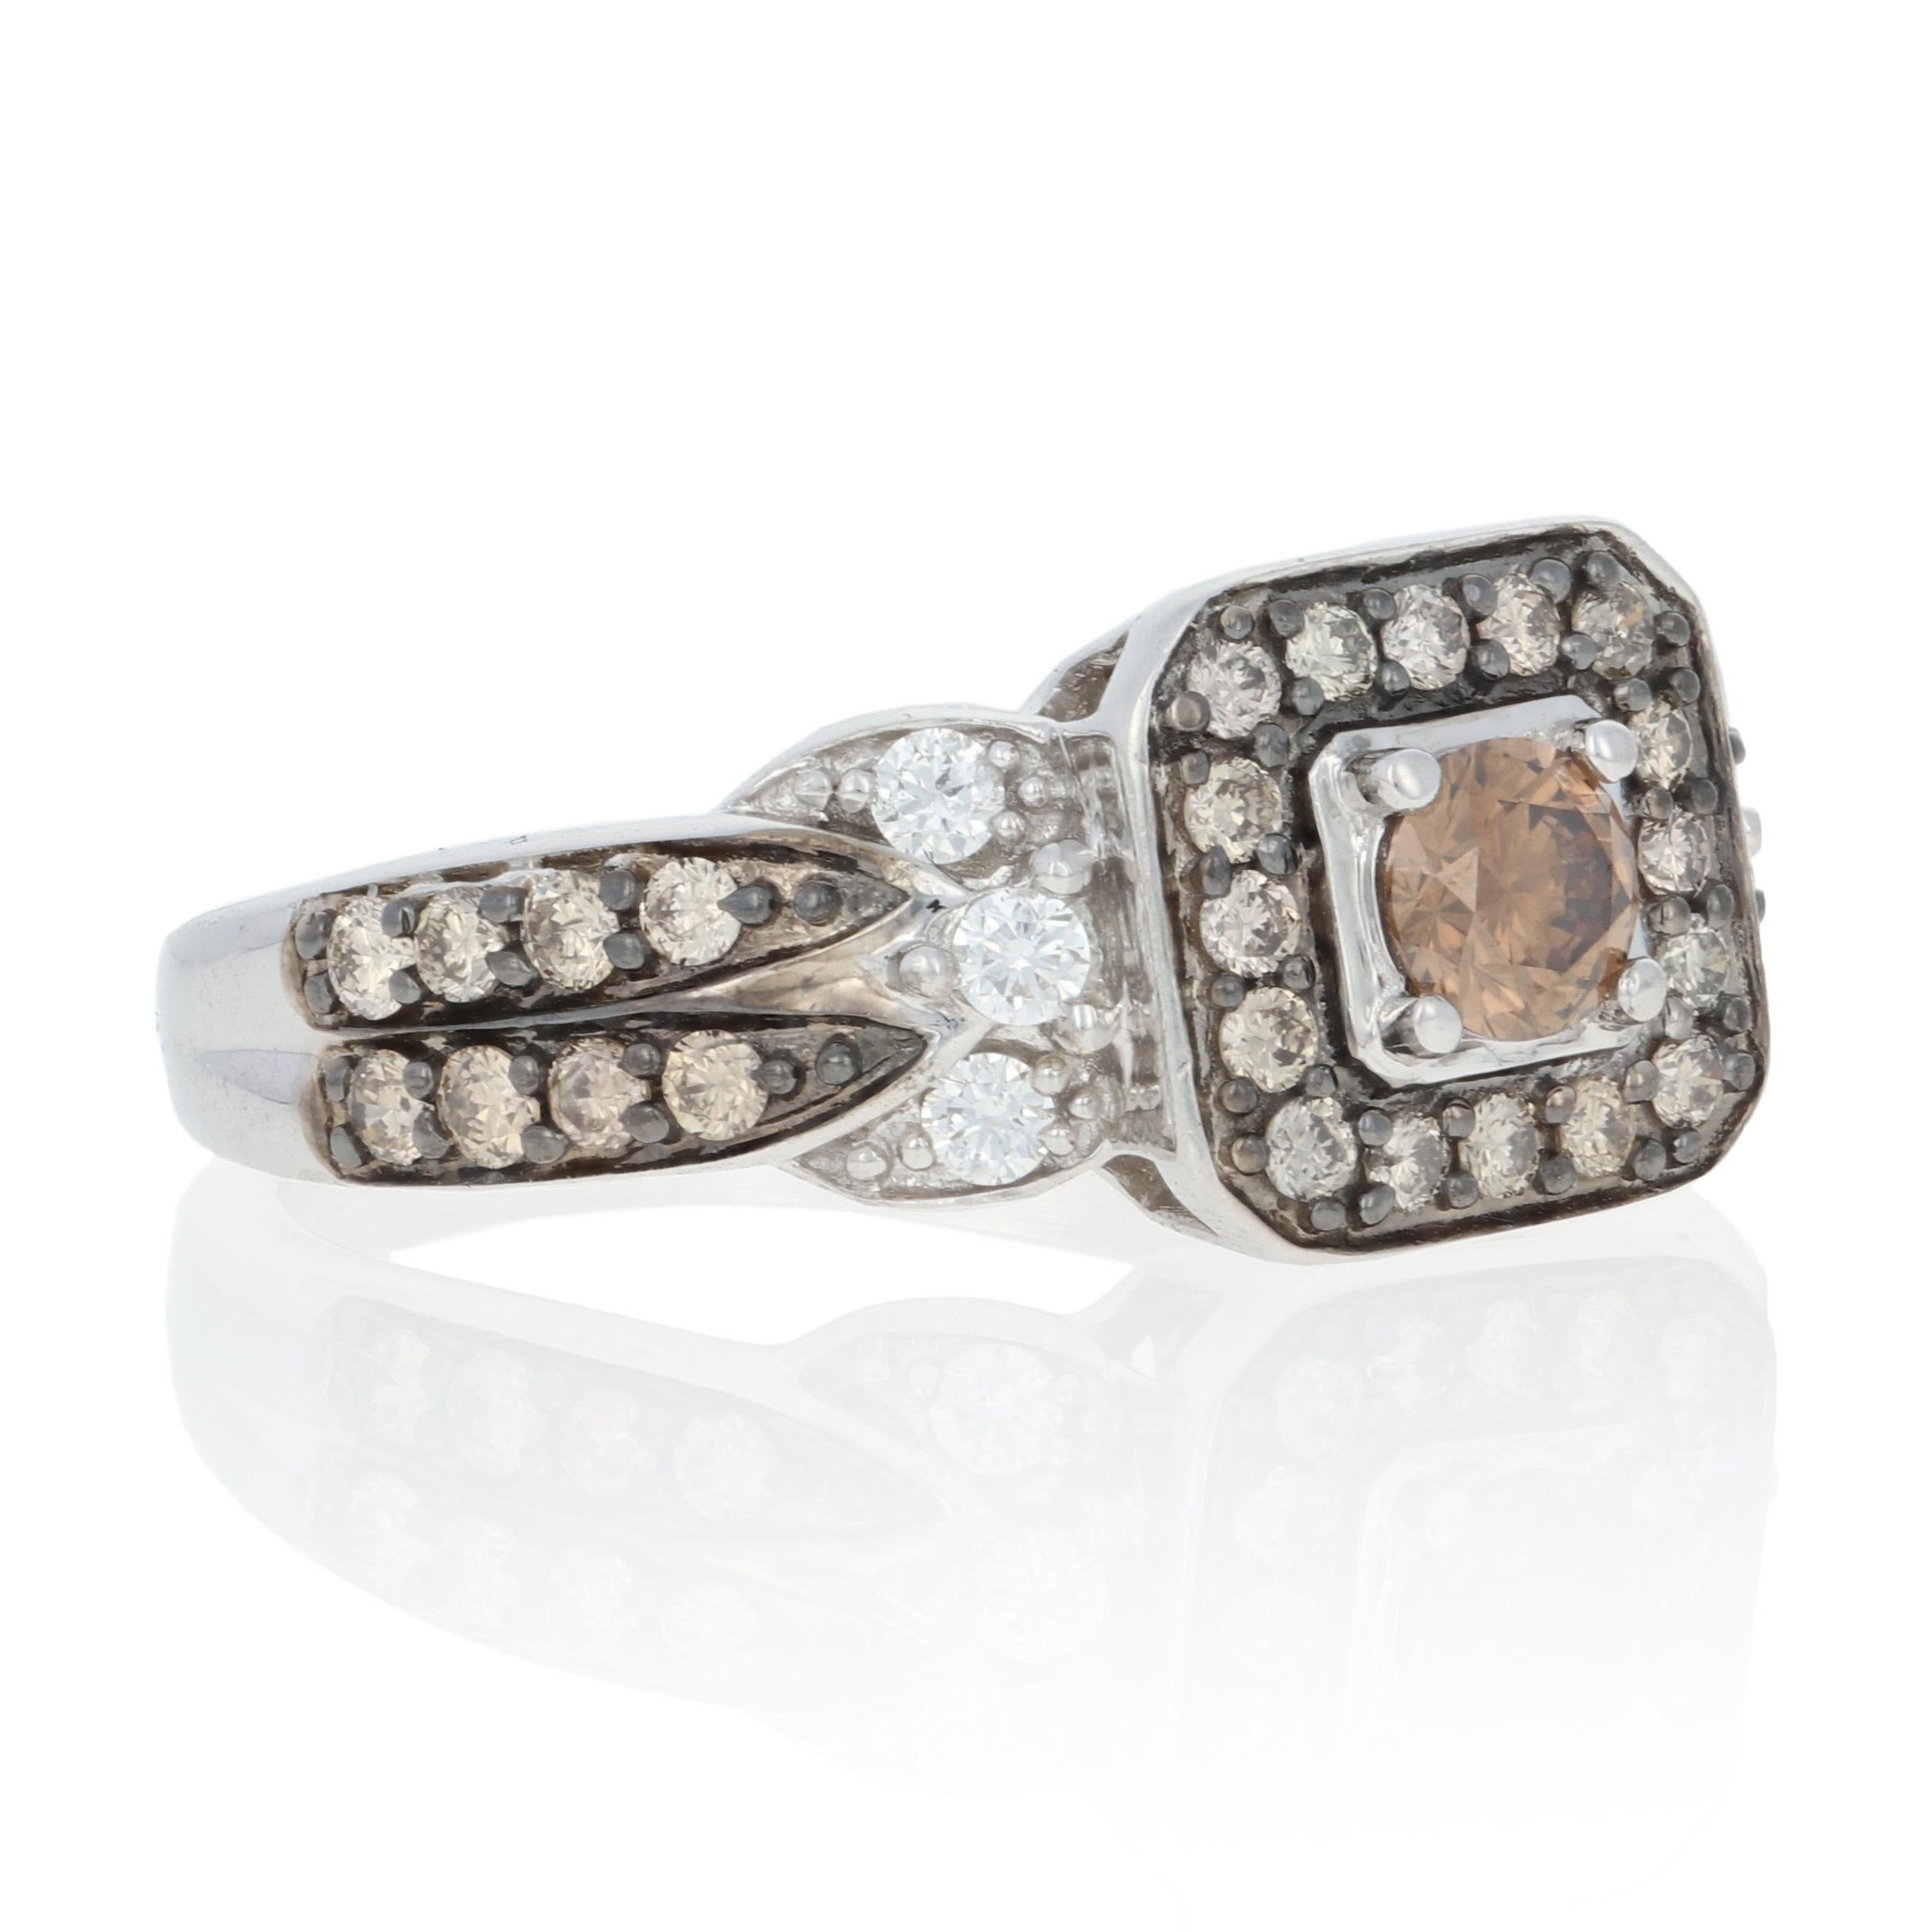 Originally retailing for $3000, this beautiful designer ring is being offered here for a much more wallet-friendly price.

Size: 7 1/2
Sizing Fee: Up 2 sizes or Down 1 size for $25
Please note, the resizing process will remove the ring's